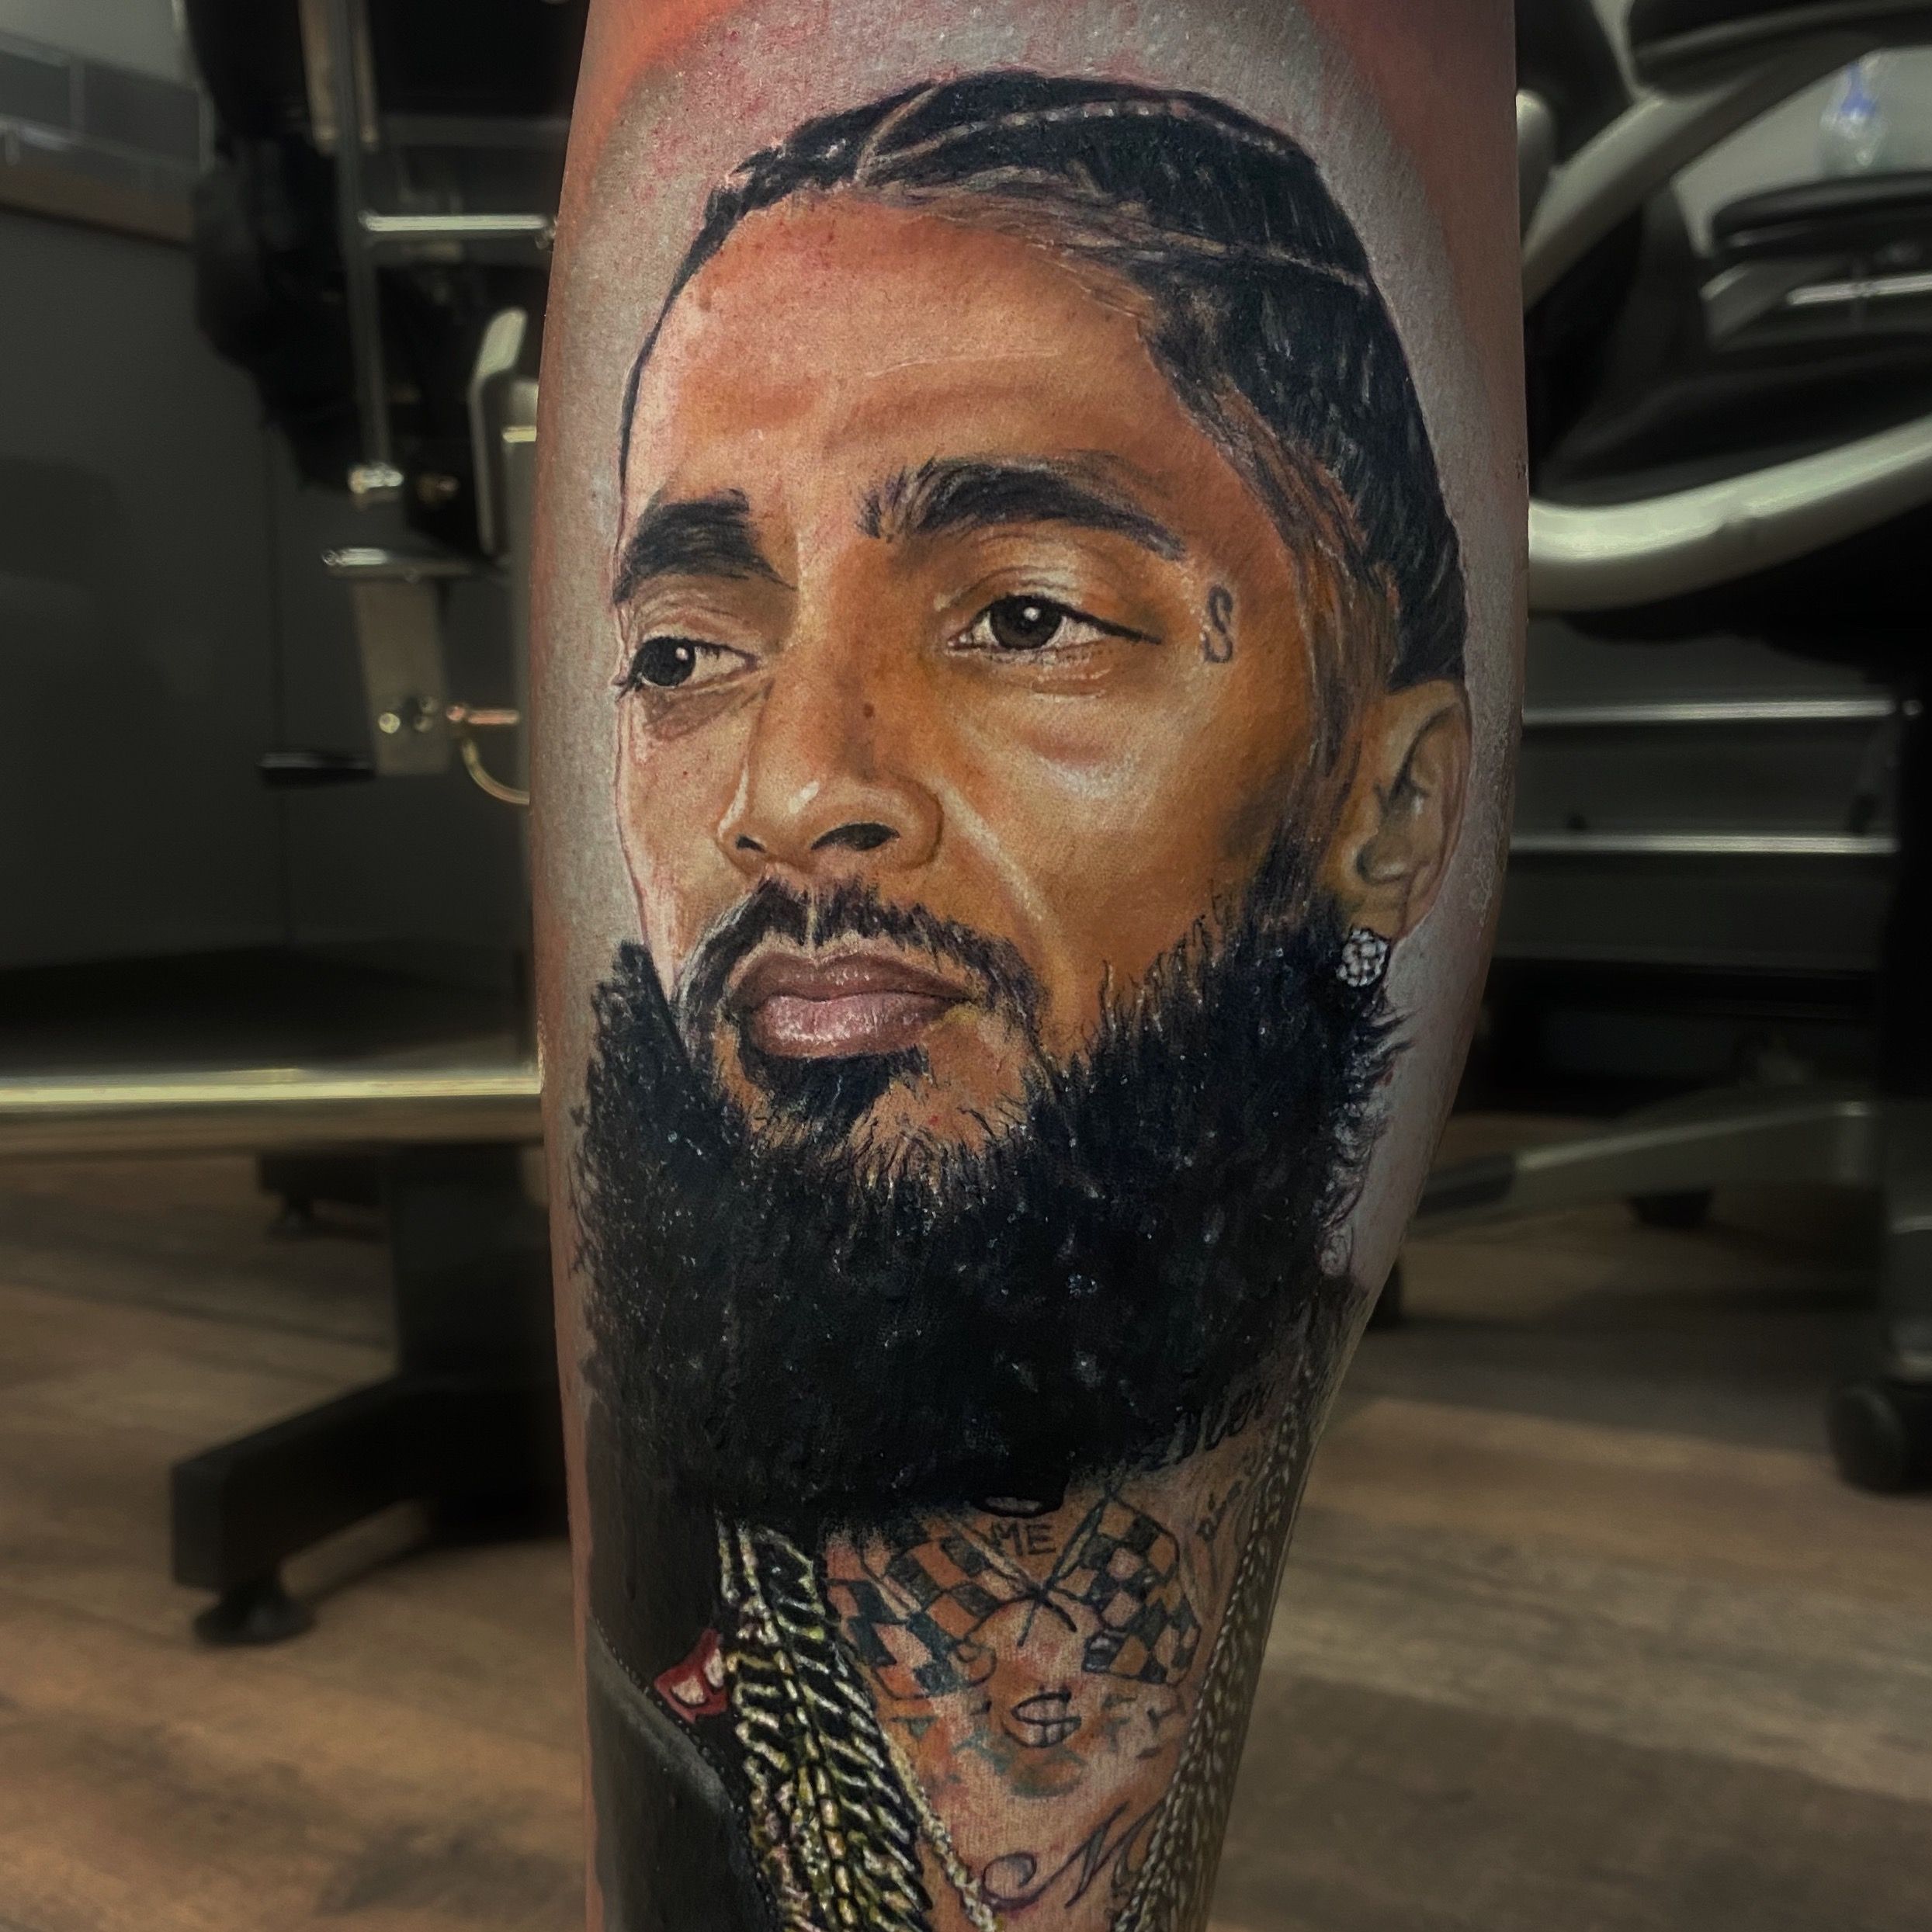 CultureCentral on Twitter Here are just a few dope pieces of fan art tattoos dedicated to our beloved Nipsey Hussle RememberingNipsey TMC  httpstcoslaVFNQOM6  X